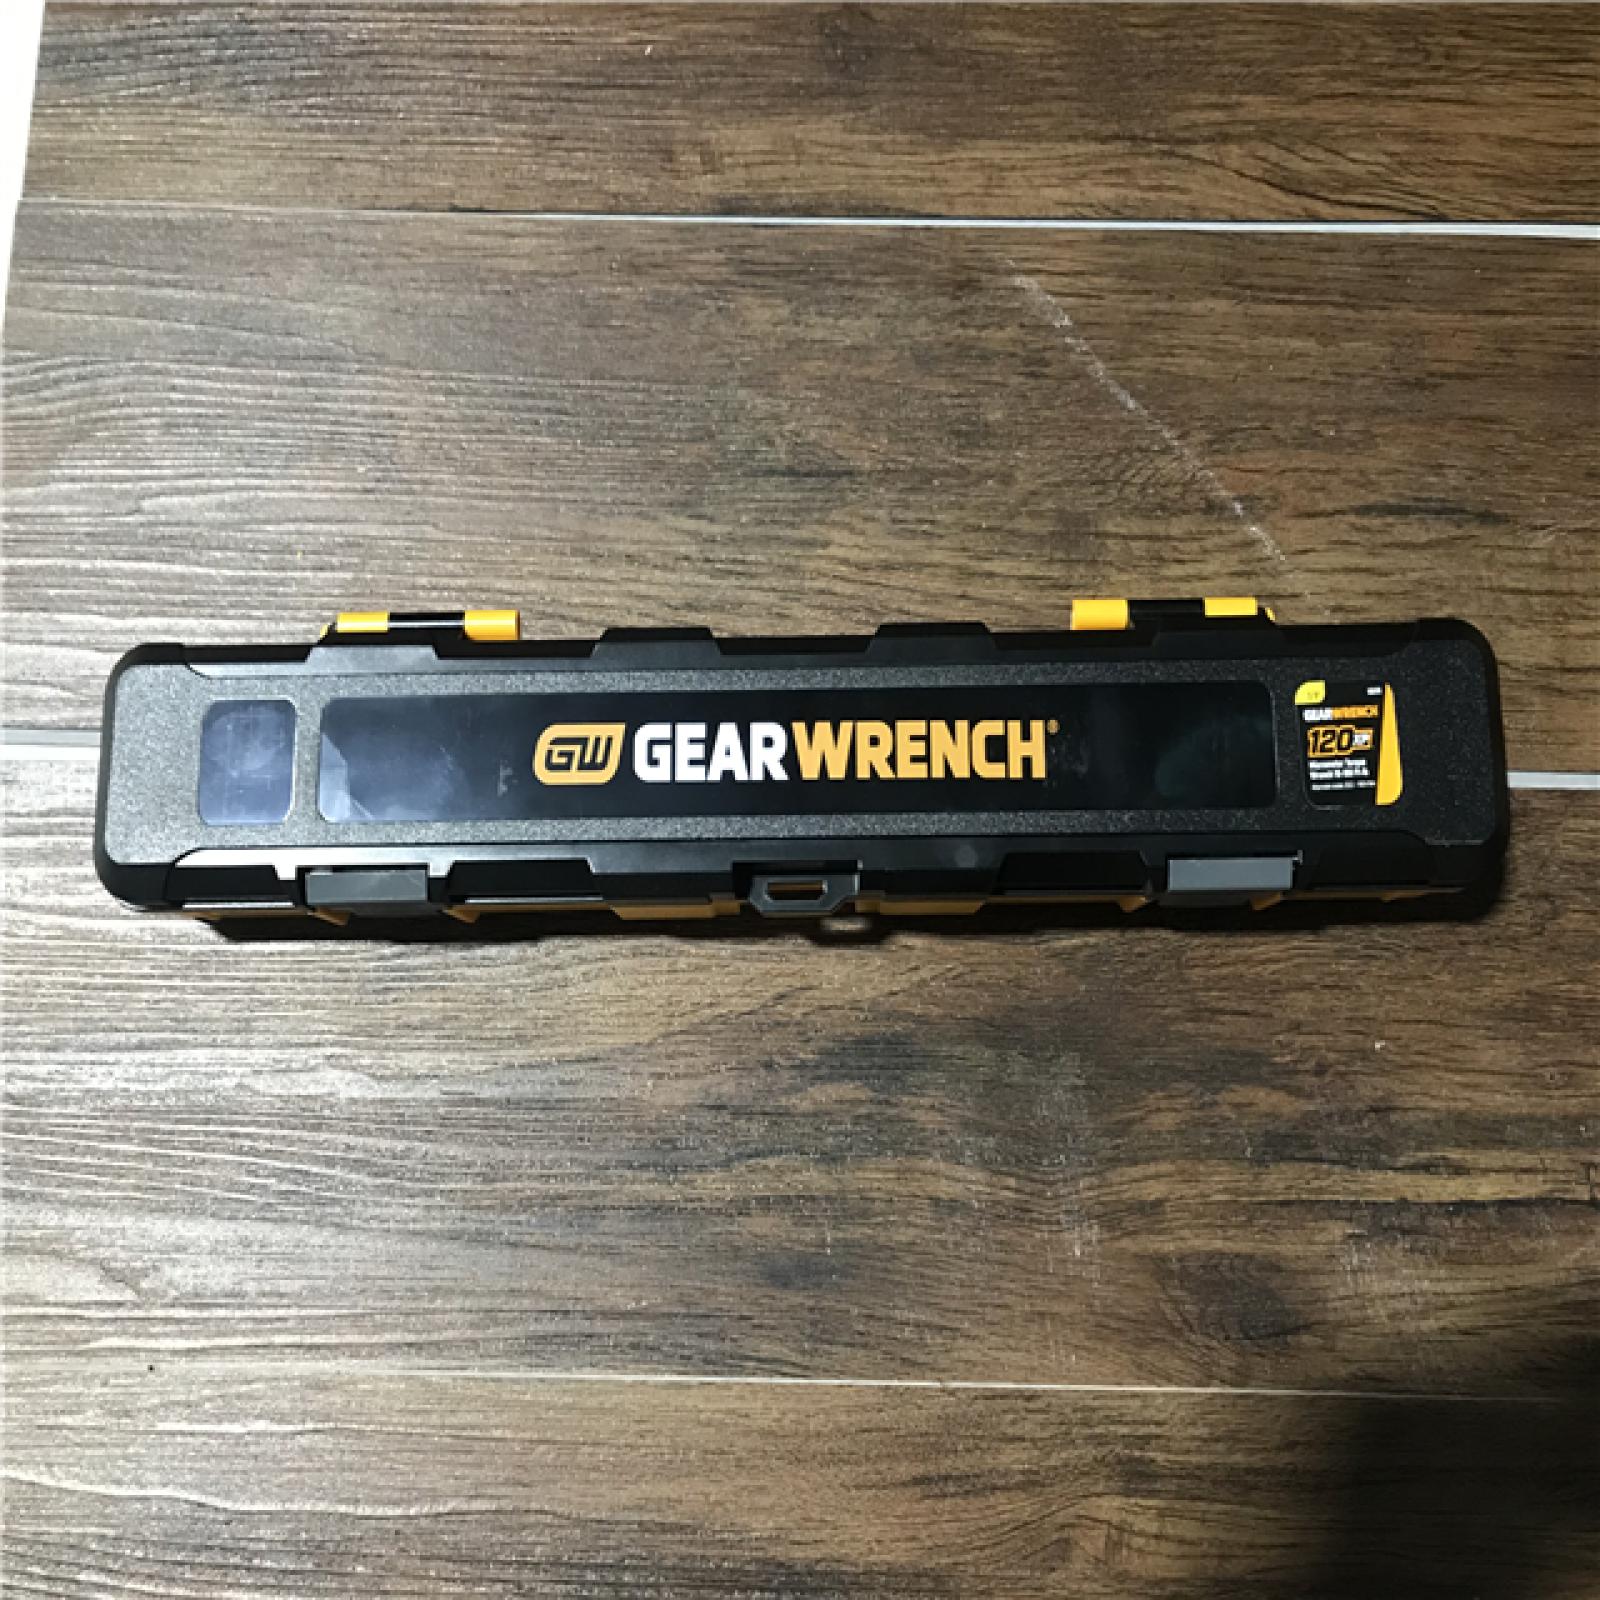 California NEW Gearwrench 120XP Micrometer Torque Wrench 10-100 FT-LB